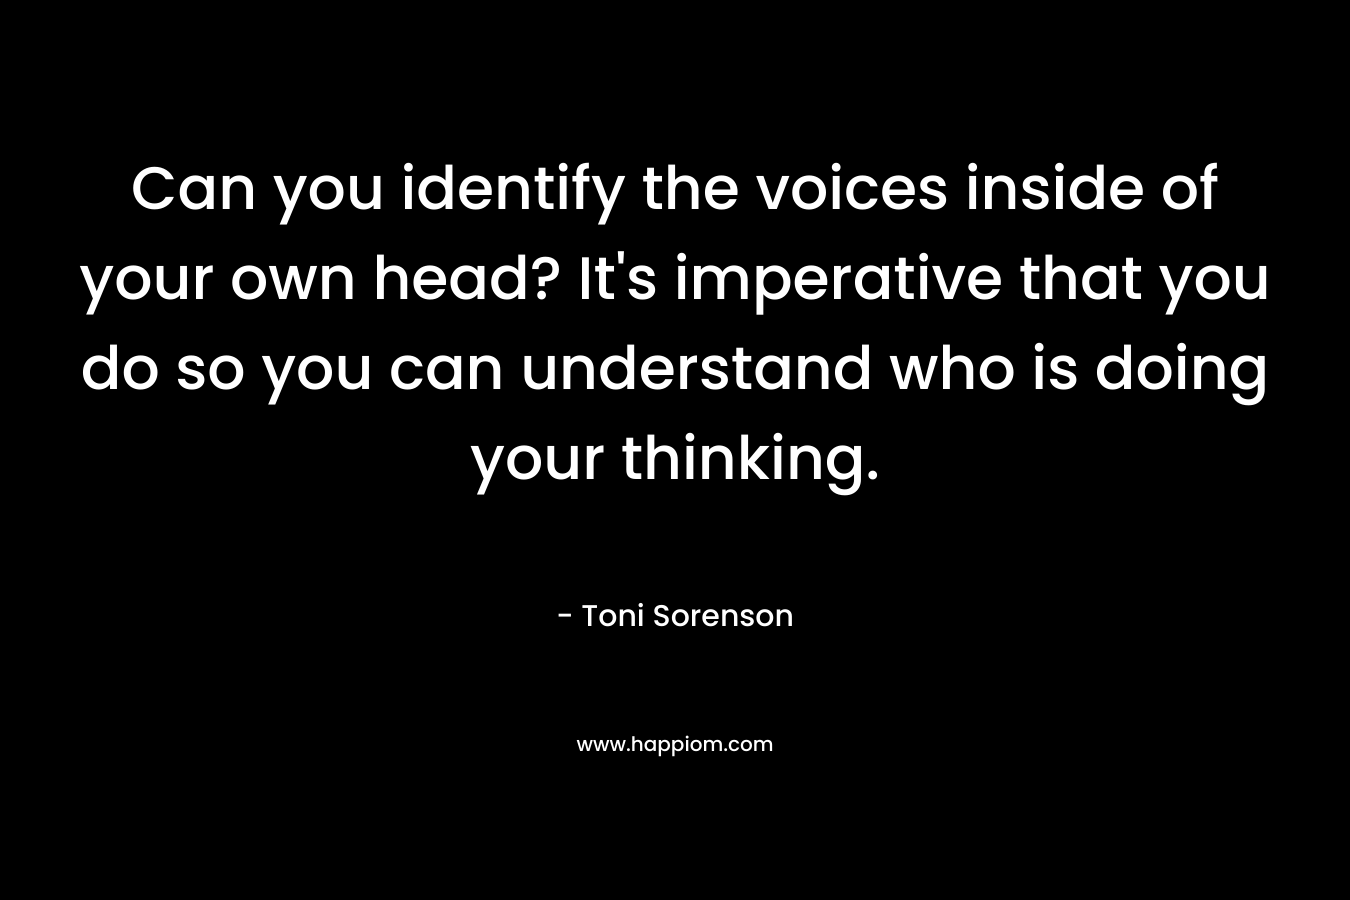 Can you identify the voices inside of your own head? It's imperative that you do so you can understand who is doing your thinking.